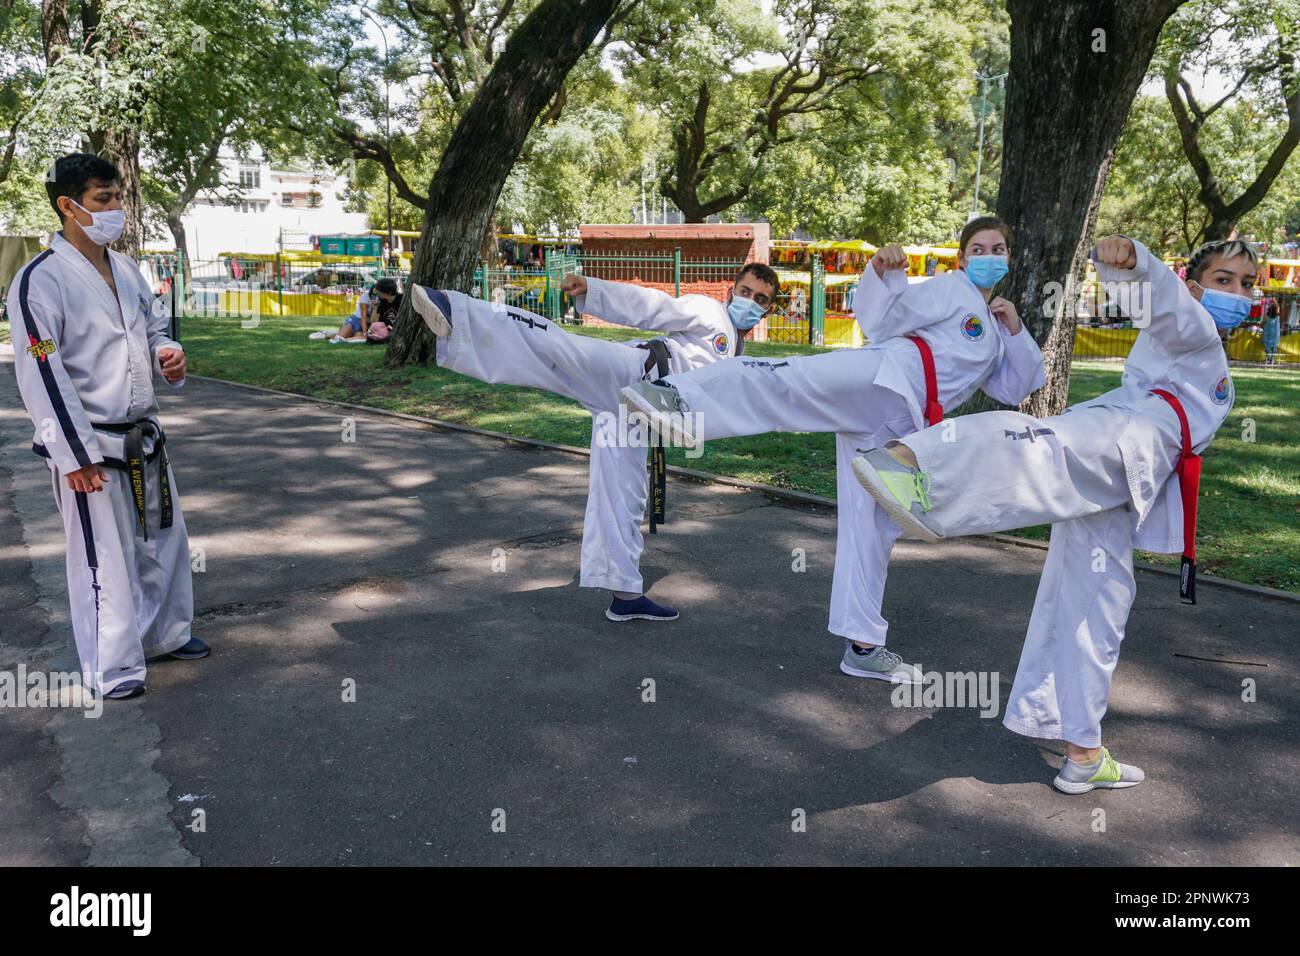 Héctor Avedaño, far left, instructs, from left, Nahuel Deleva, Diana Gómez and Iara Bustamante in Buenos Aires, Argentina on February 19, 2022. Avedaño, who started teaching taekwondo outdoors during the coronavirus pandemic, now offers lessons both indoors and at parks. (Lucila Pellettieri/Global Press Journal) Stock Photo